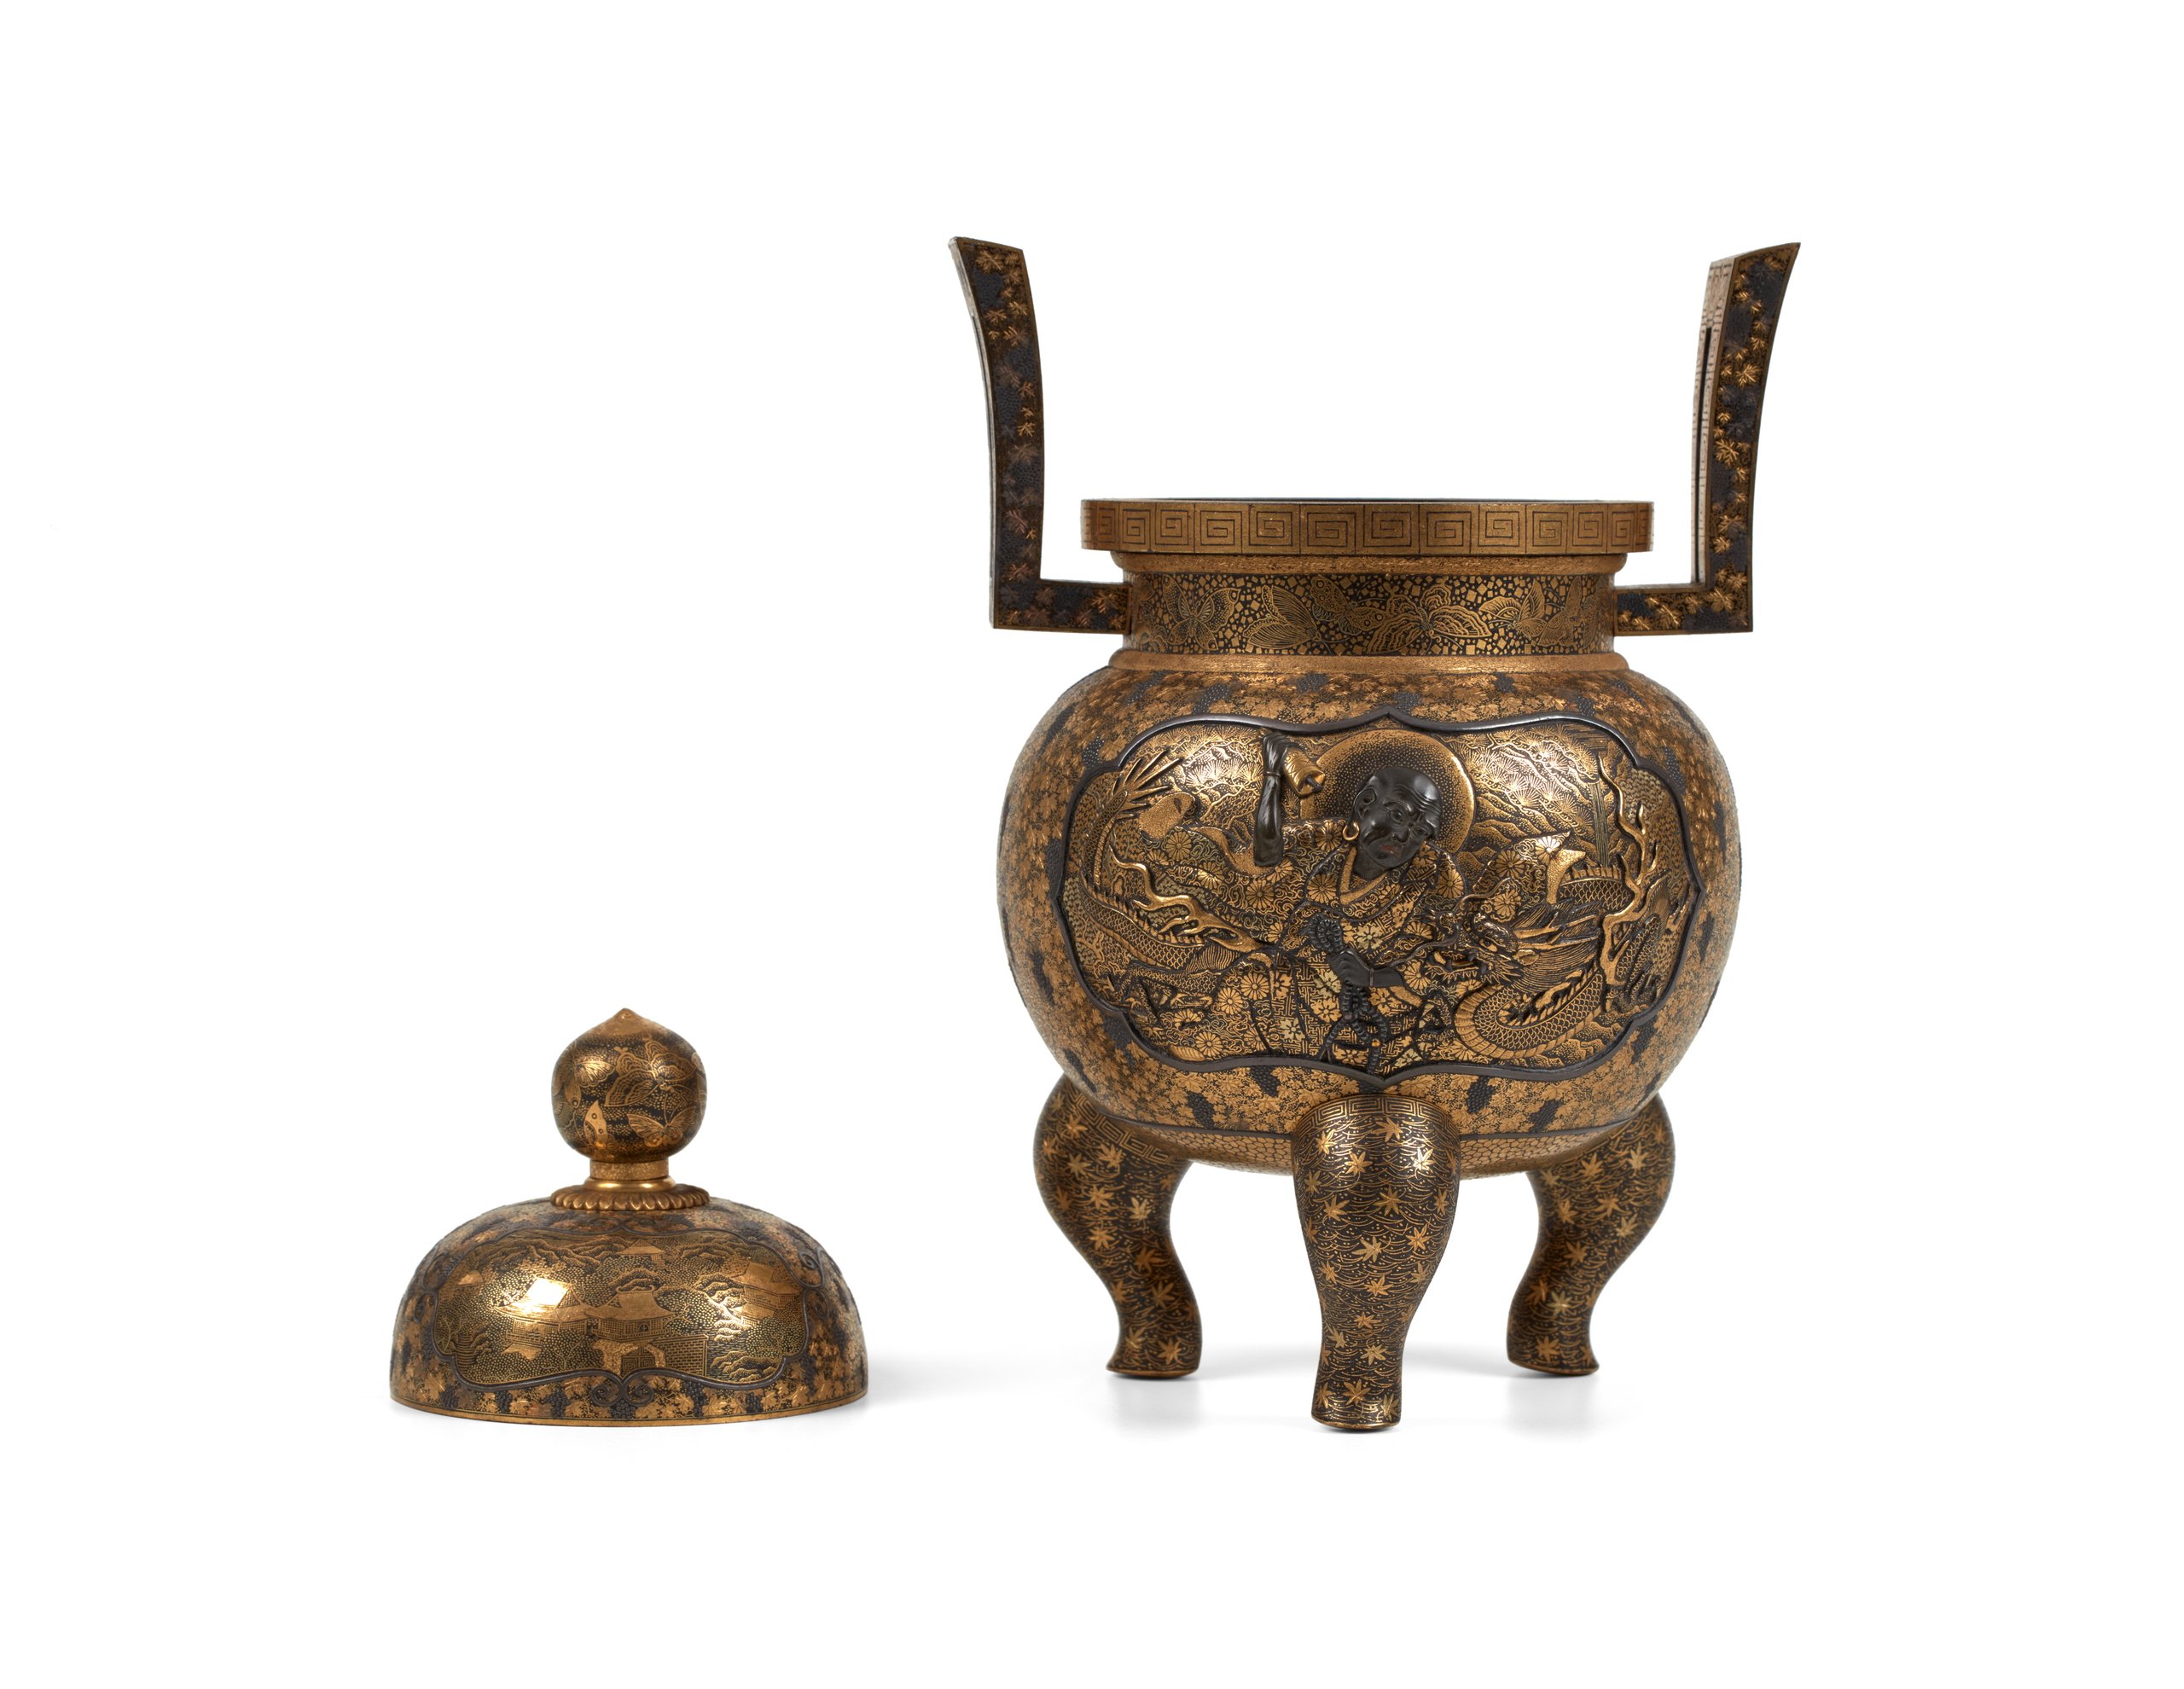 Damascene censer (koro) with lid with cartouche of Buddhist arhat and tiger